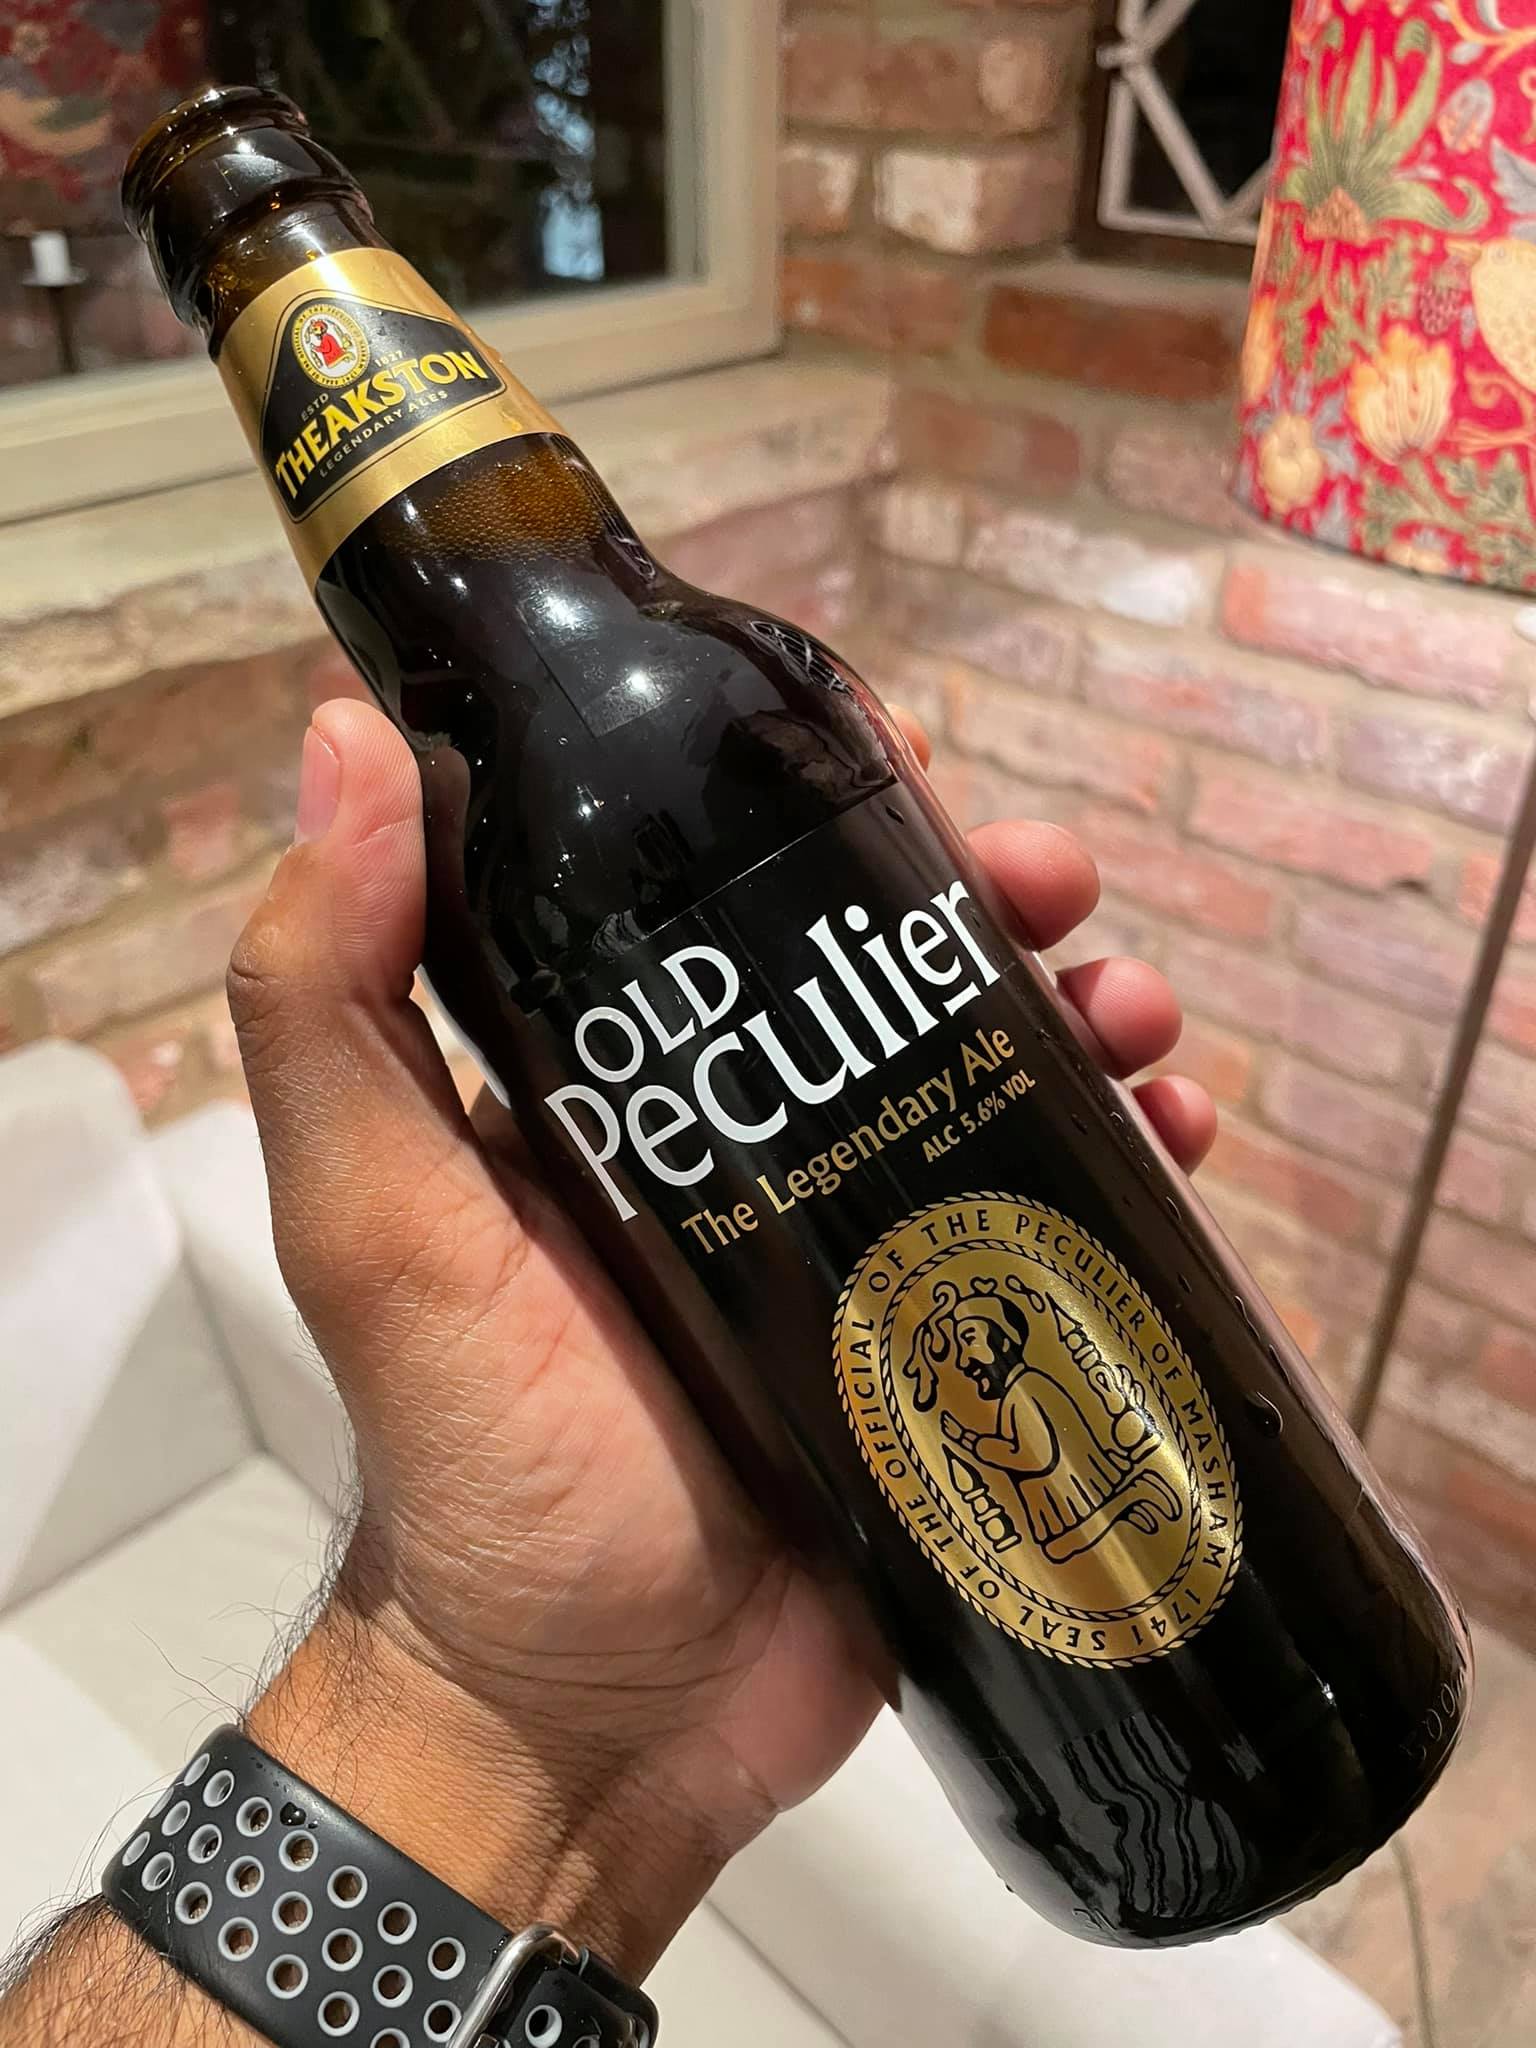 Old Peculier
